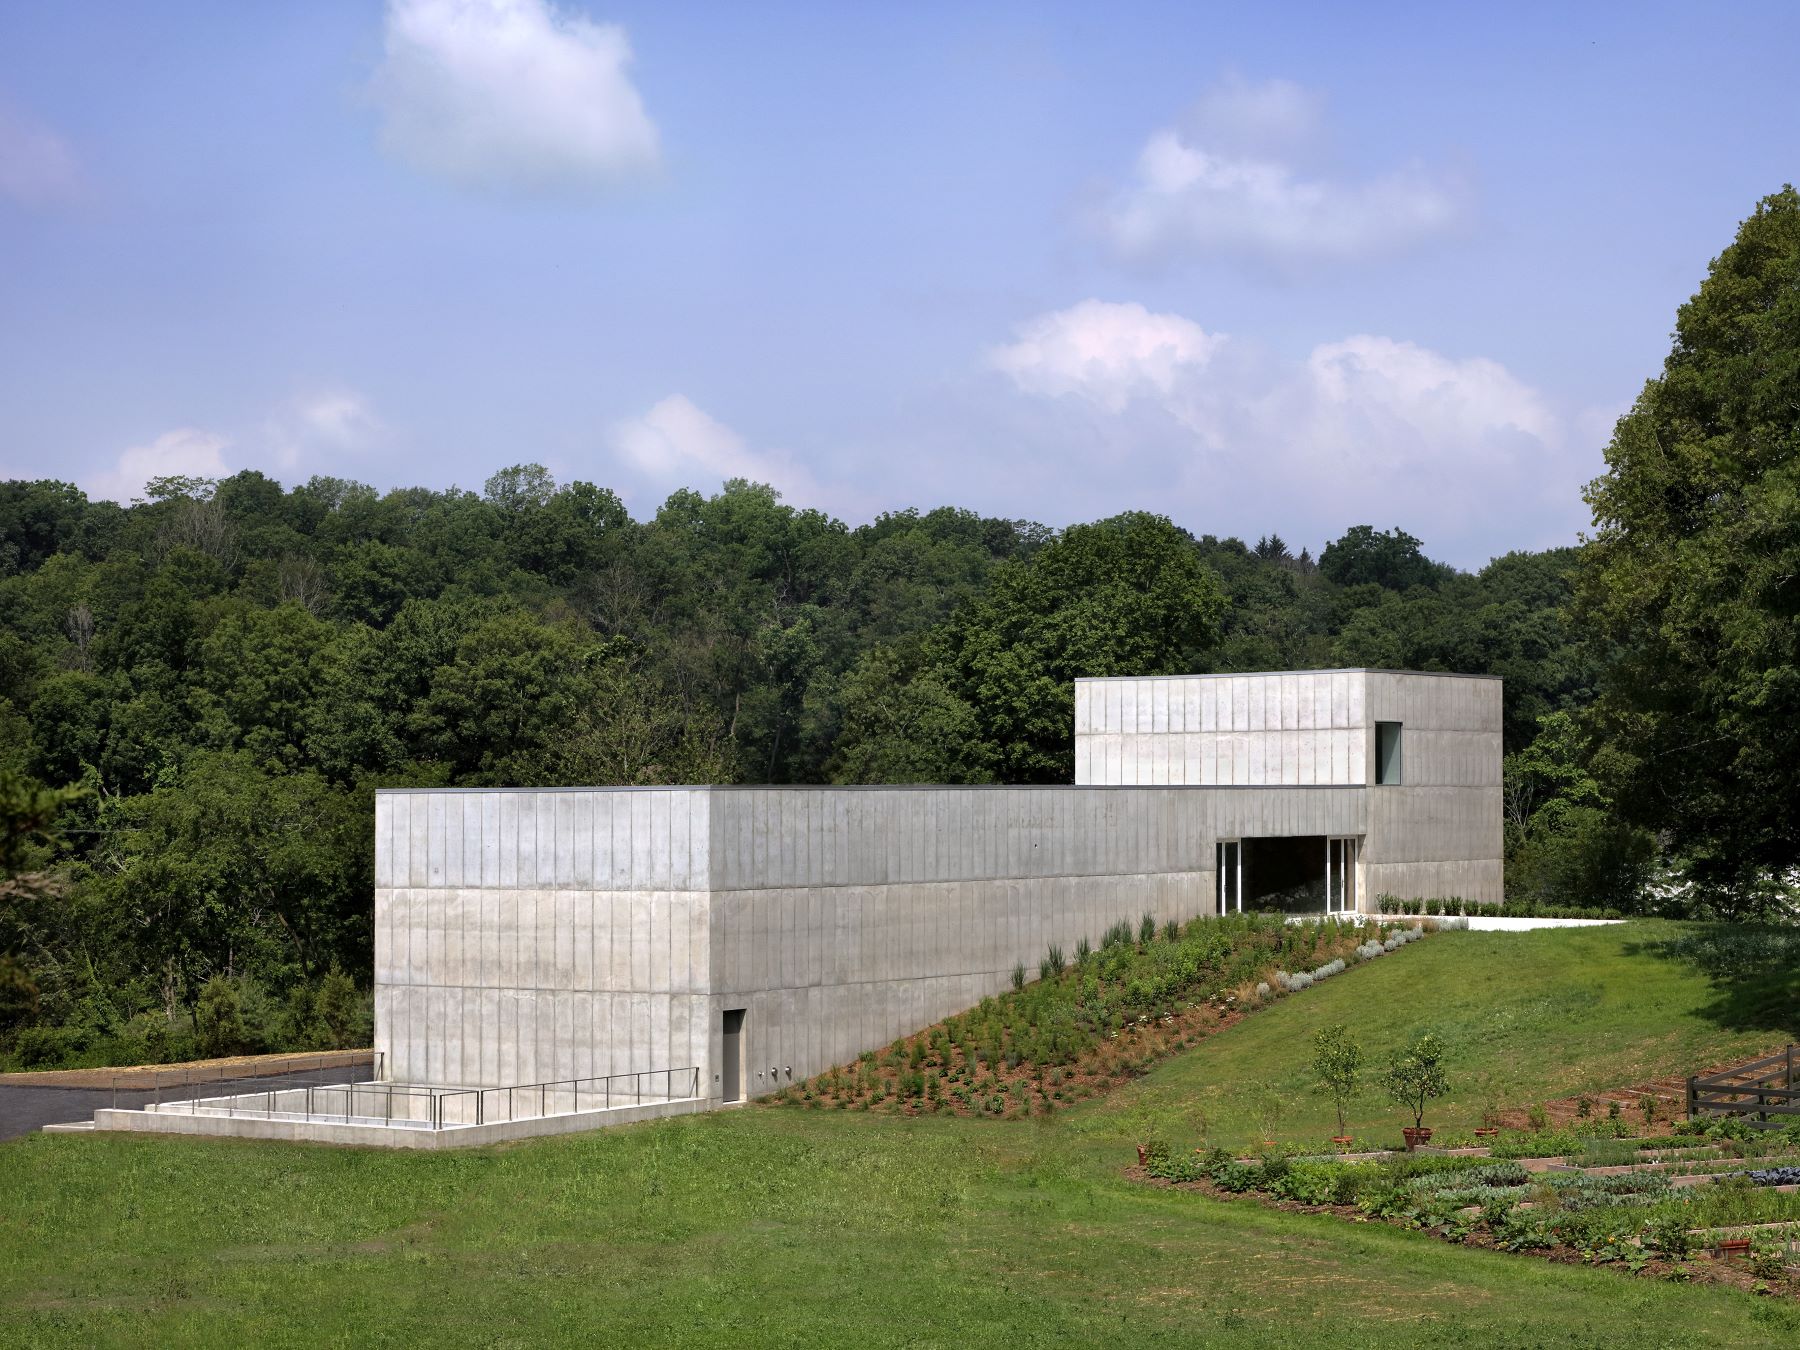 In the United States, Magazzino Italian art with distinctive architecture is growing